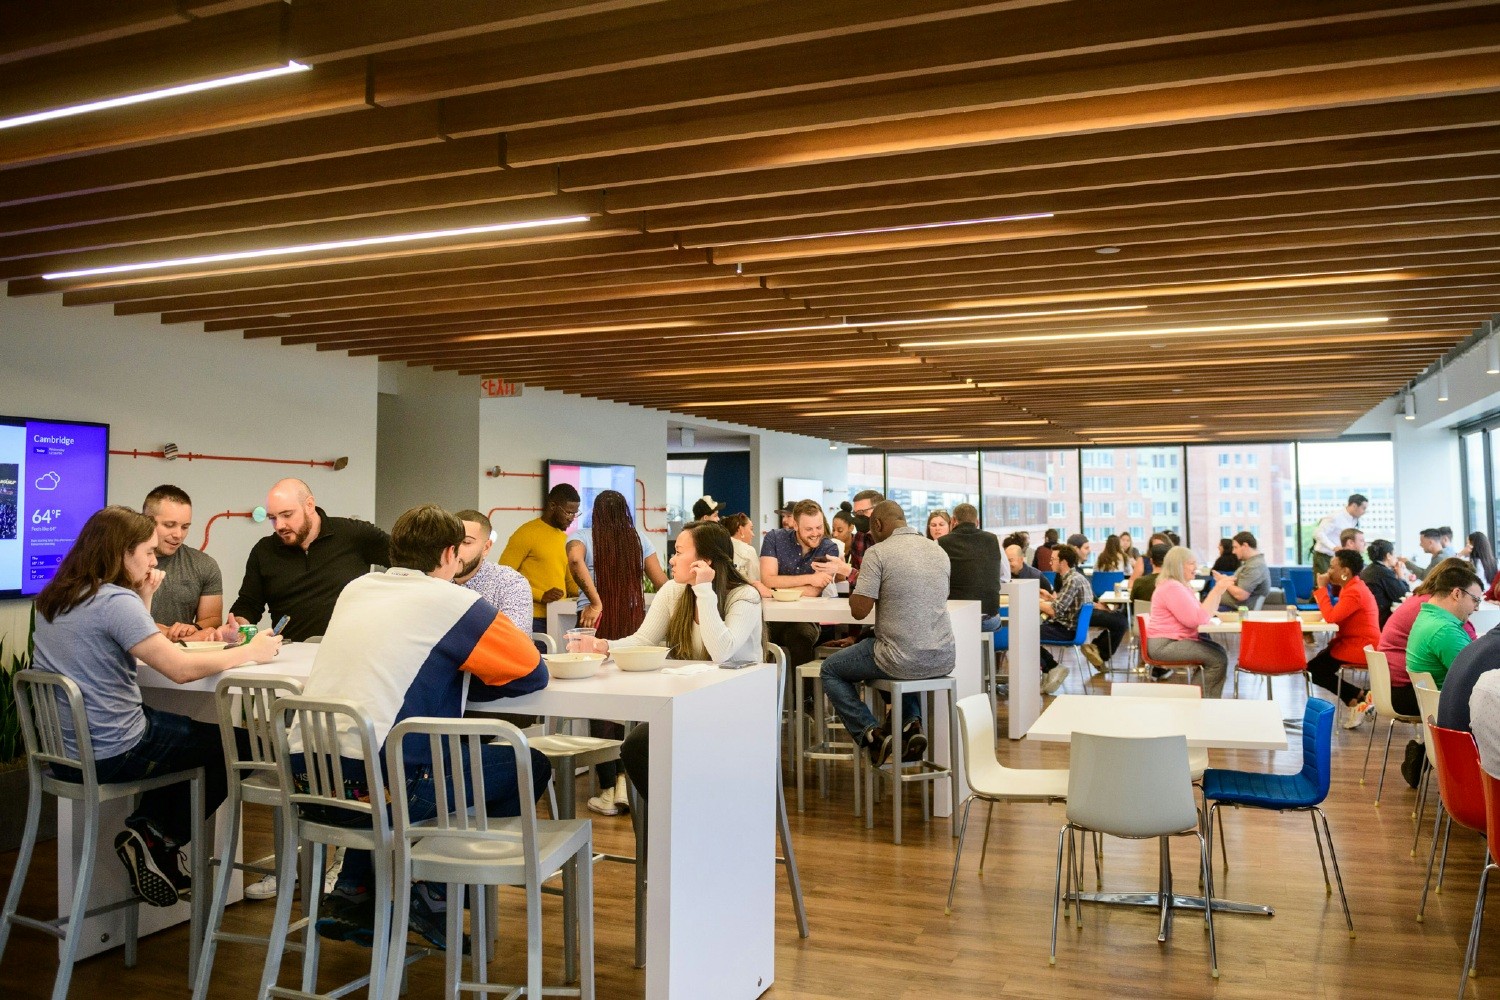 CarGurus encourages employees to relax and connect over free lunch